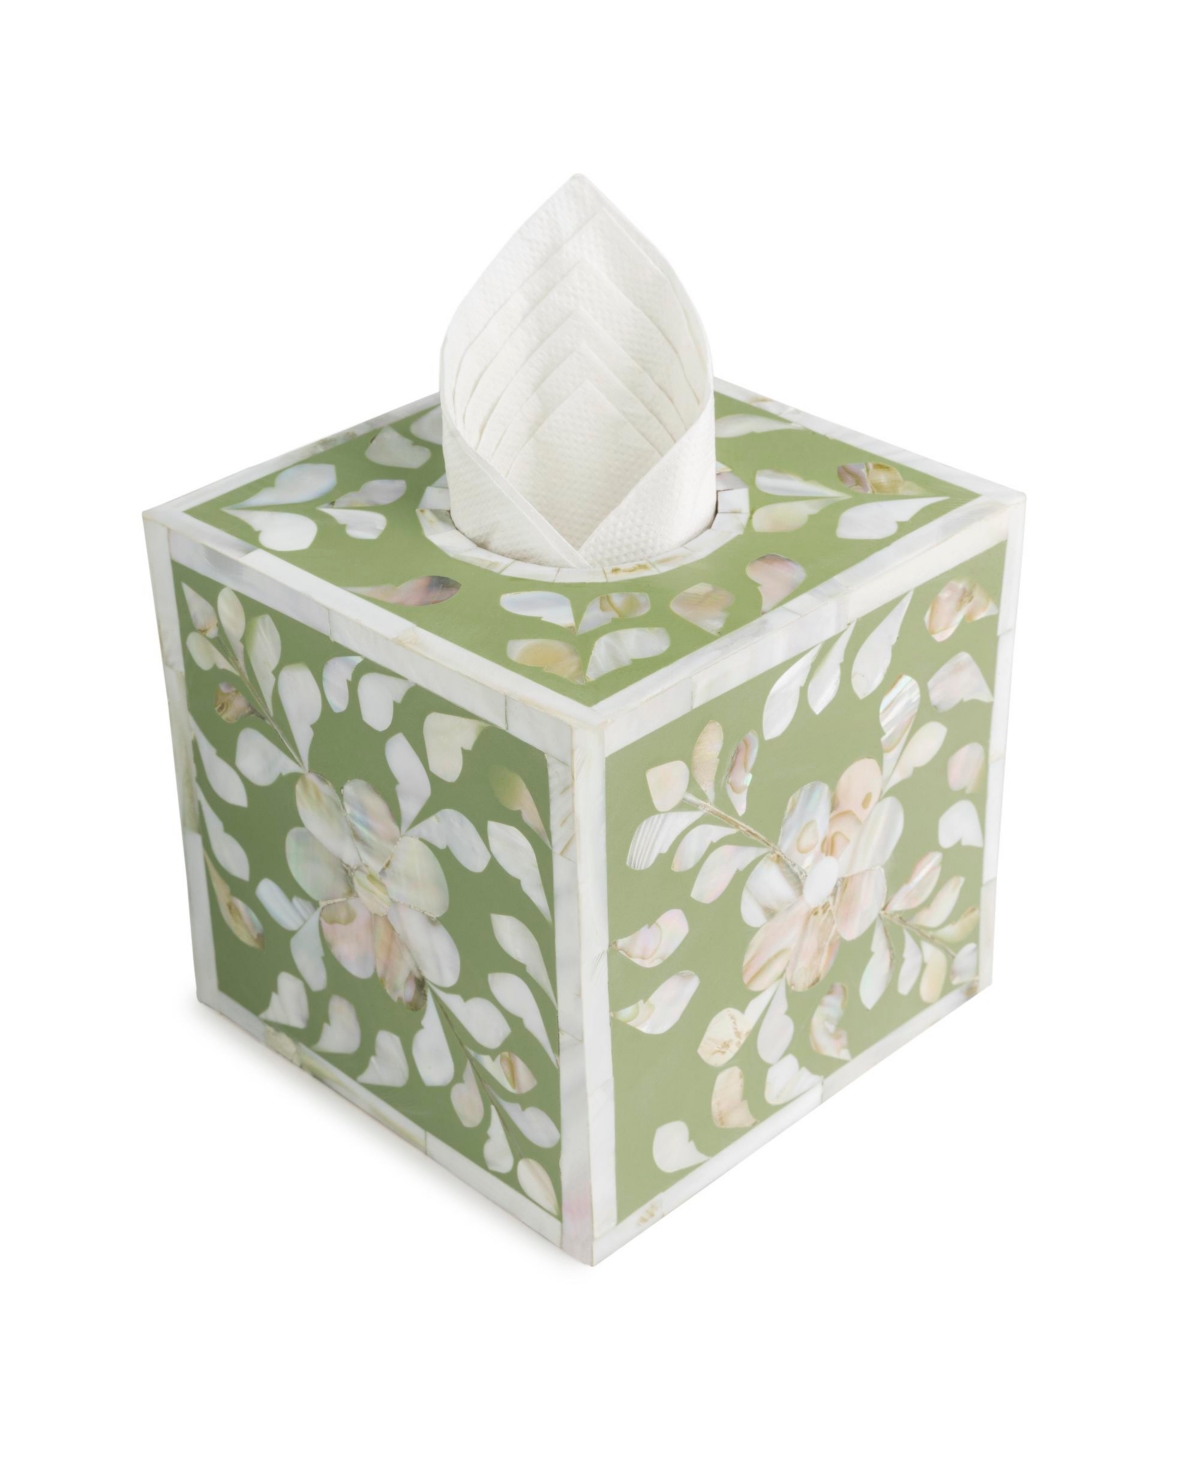 Jodhpur Mother of Pearl Tissue Box Cover, Small - Dark Red